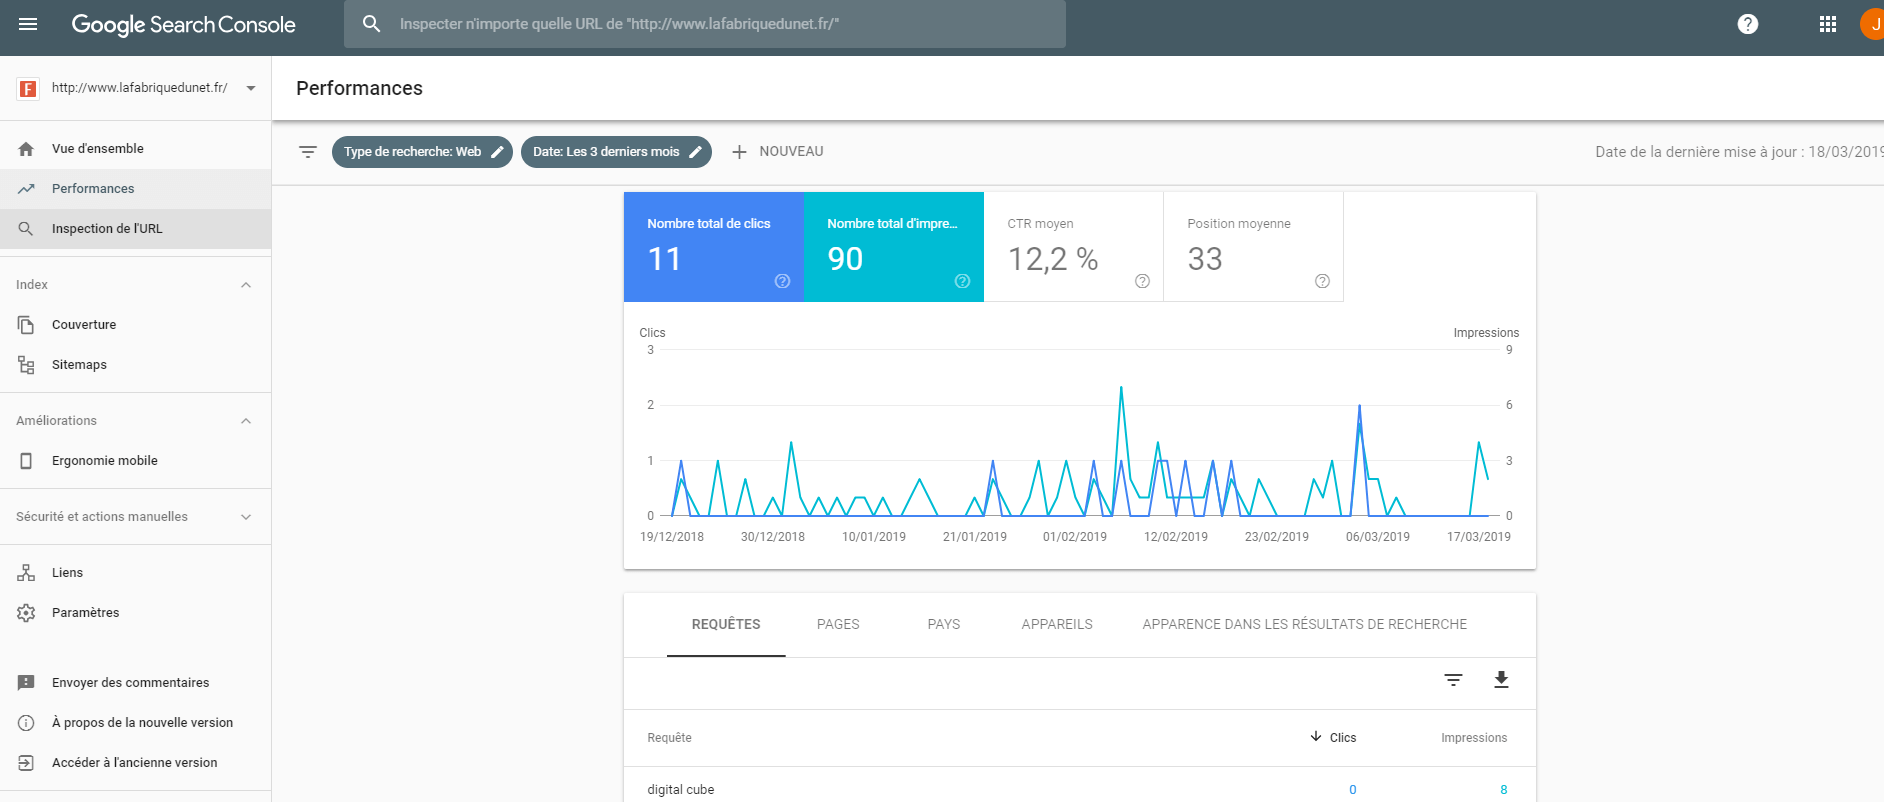 outils analytics google search console